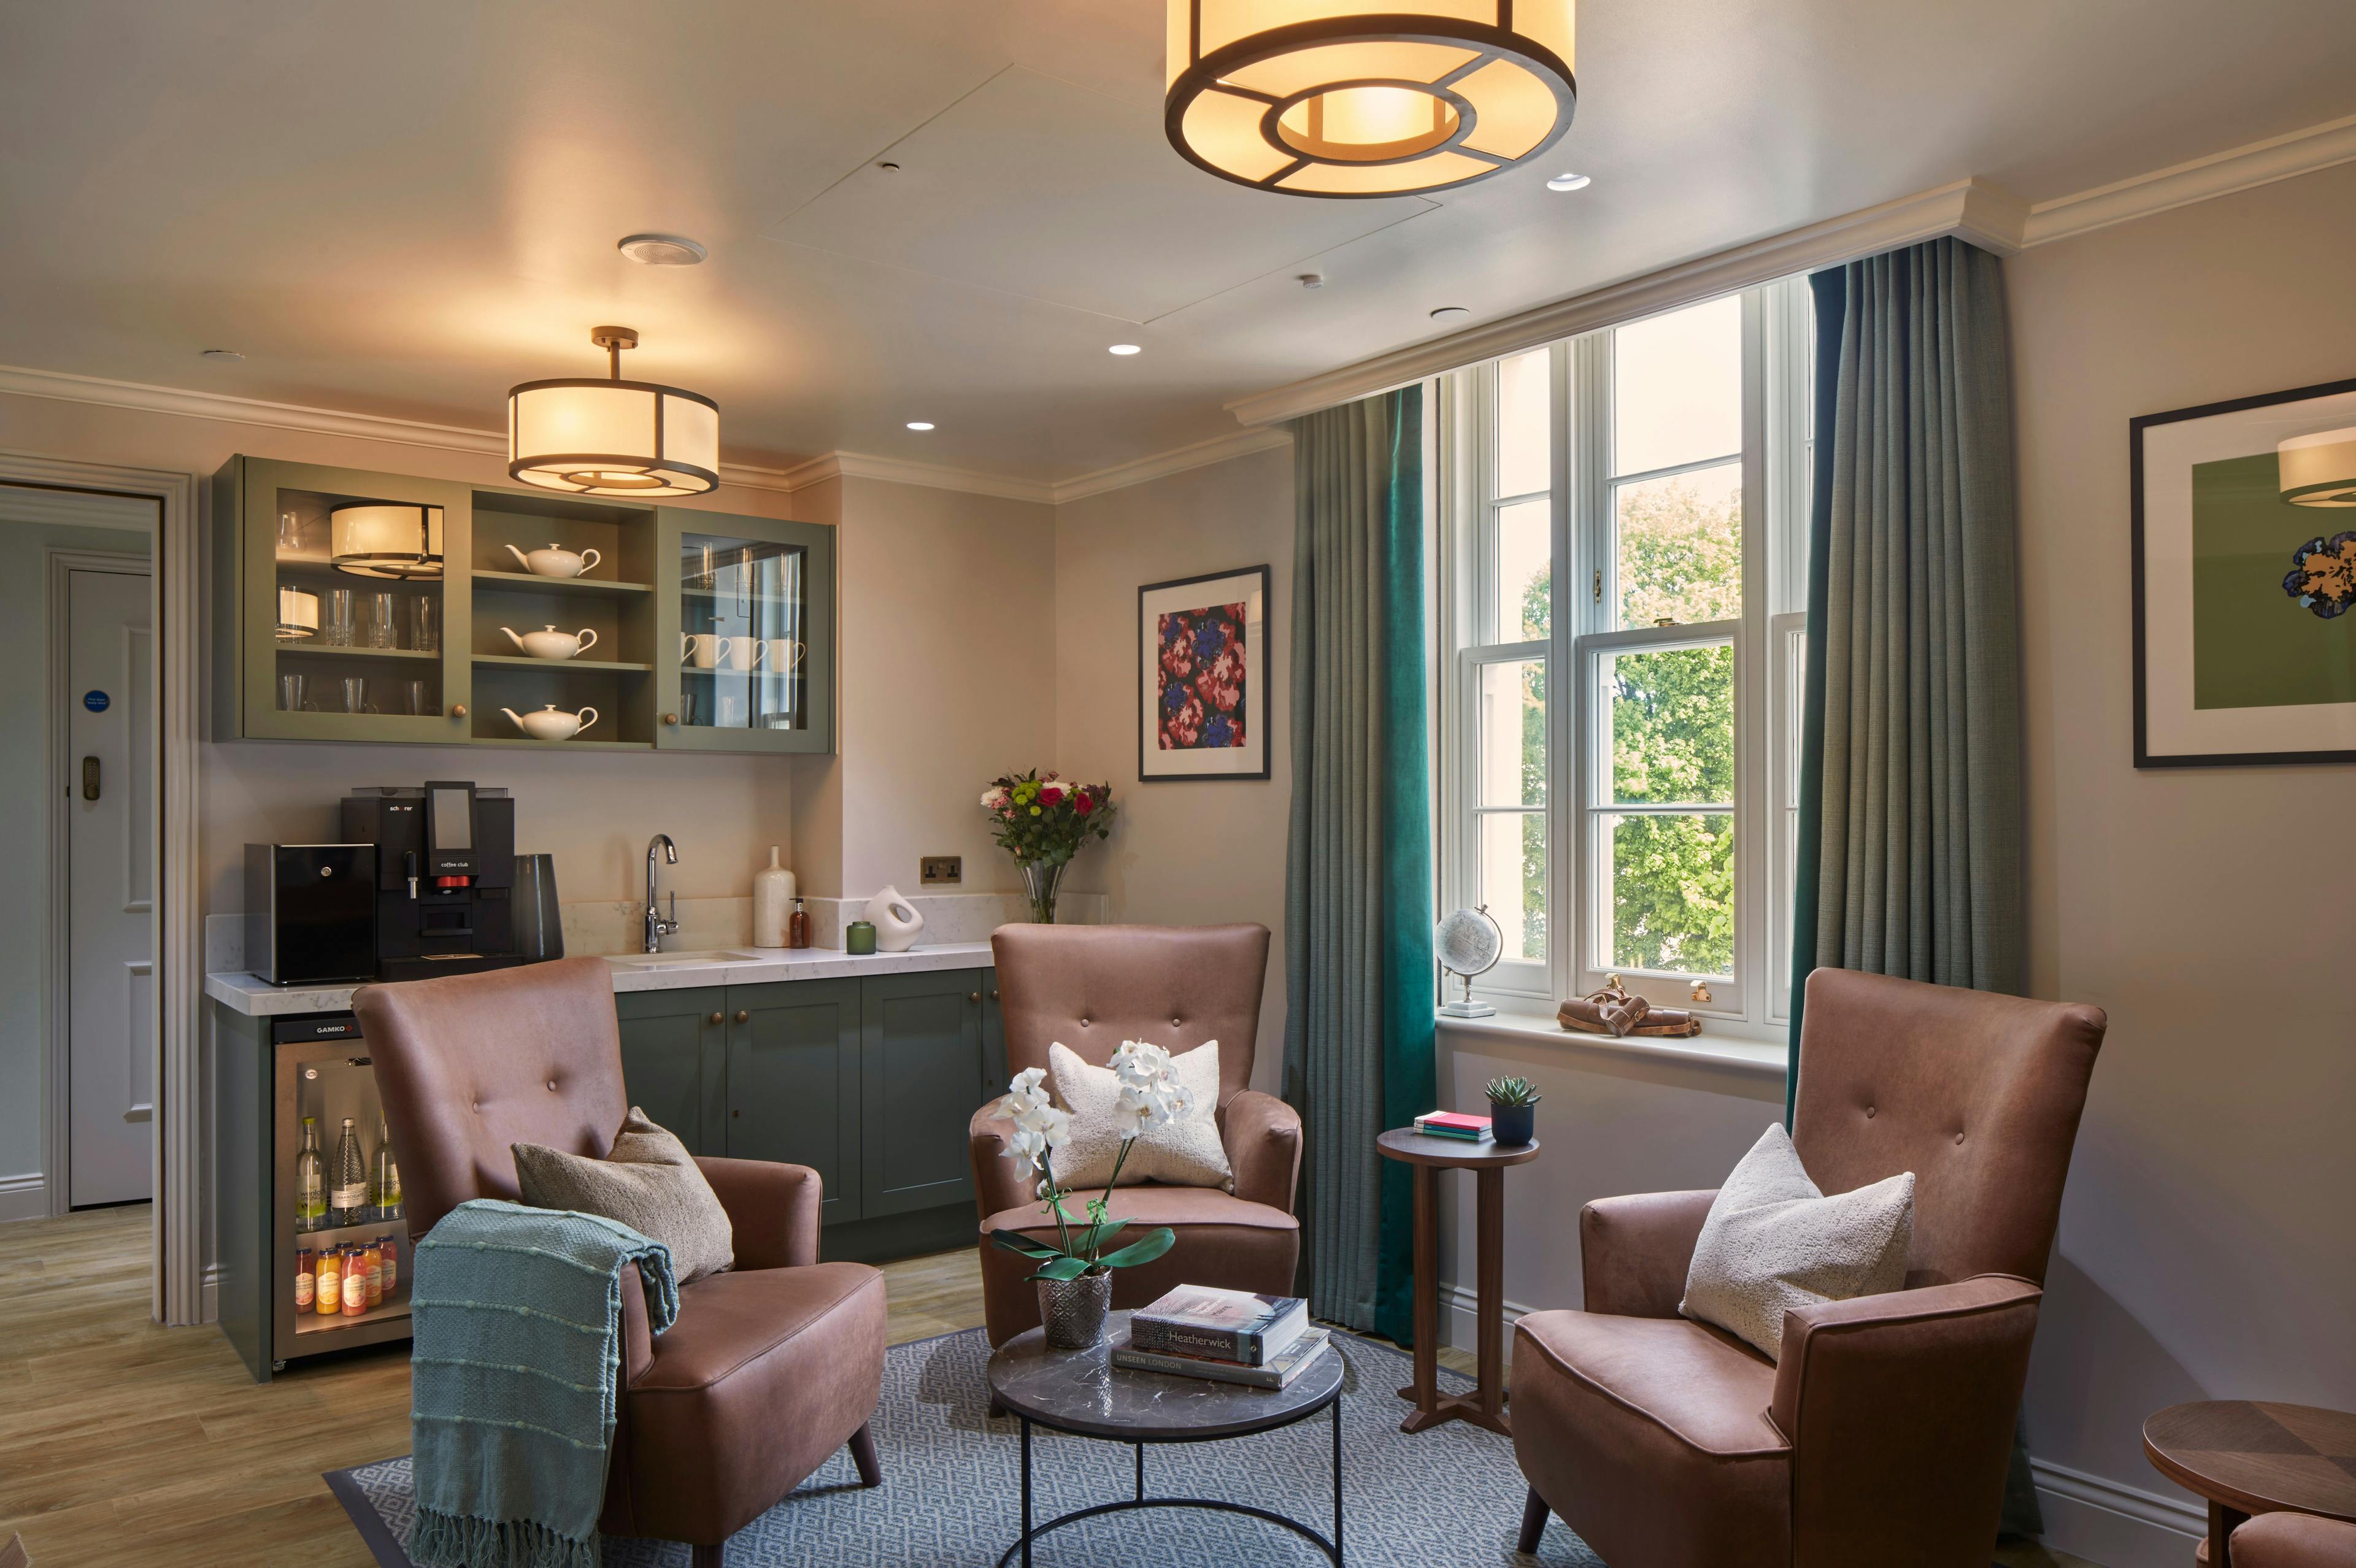 Communal Lounge at Abbey Road Care Home in London, England